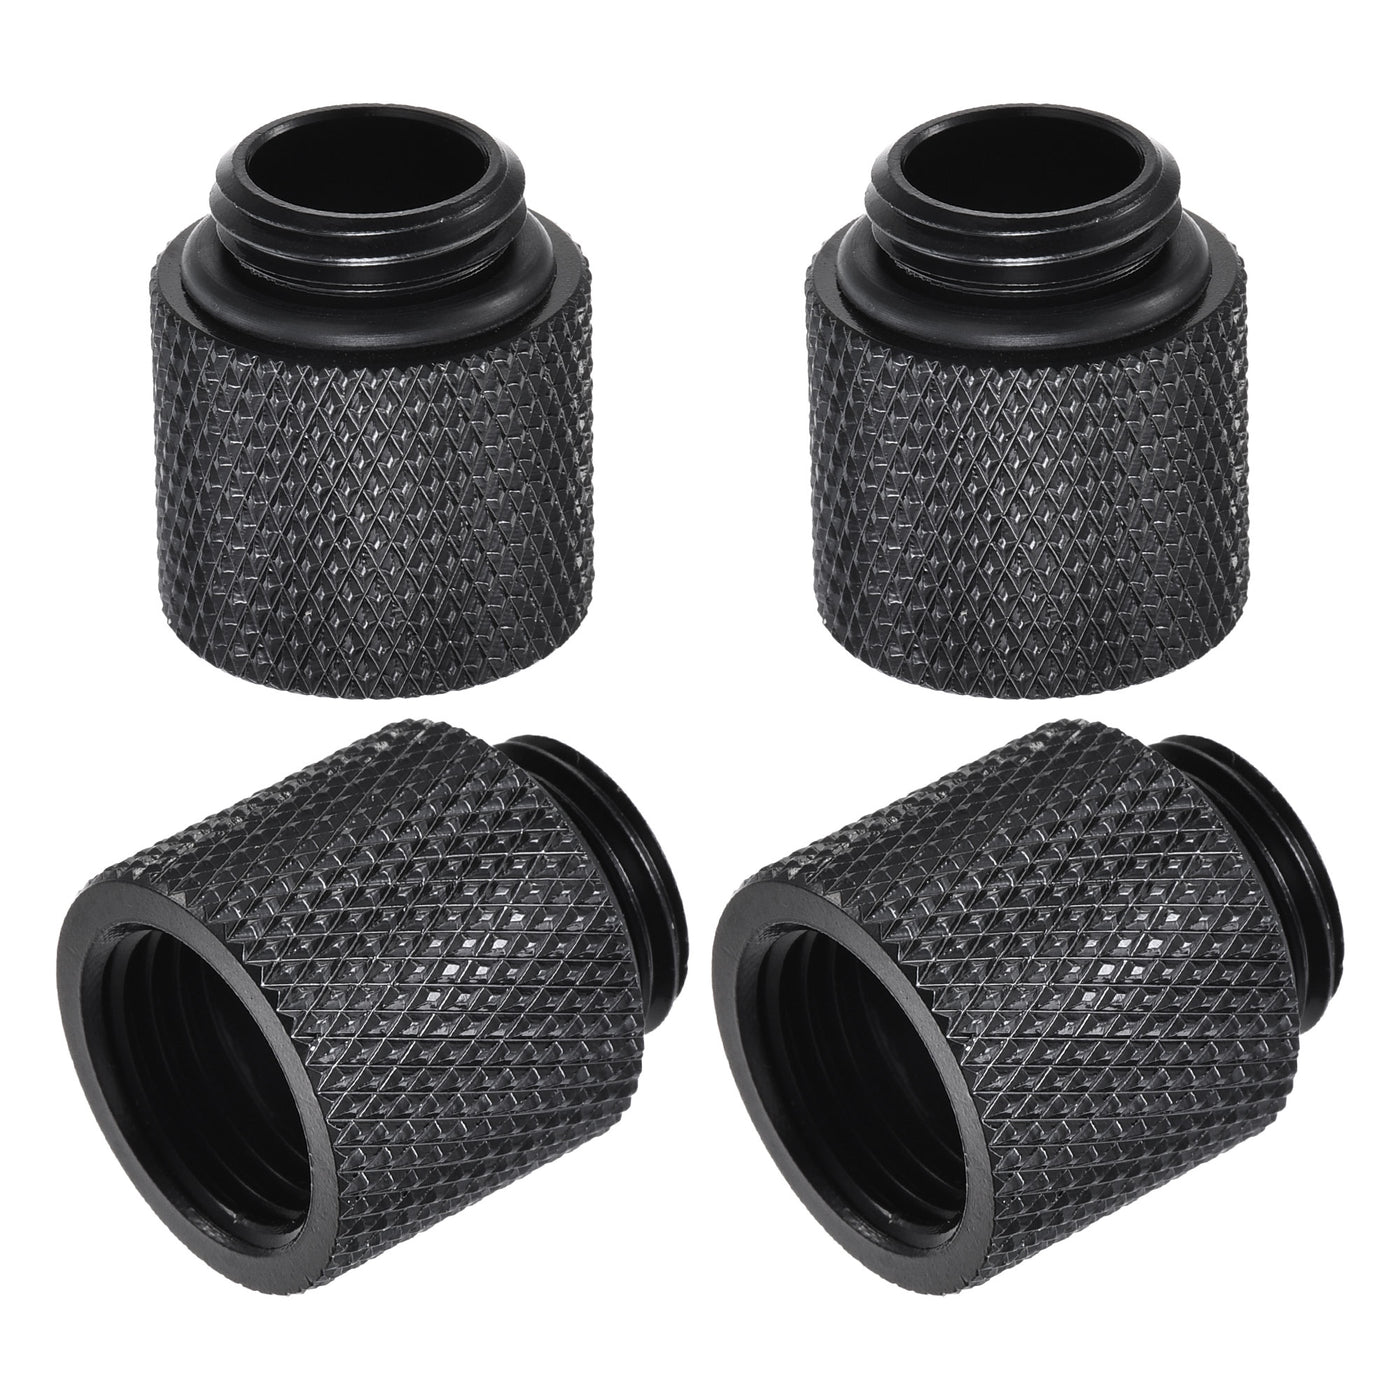 uxcell Uxcell Male to Female Extender Fitting G1/4 x 15mm for Water Cooling System Black 4pcs